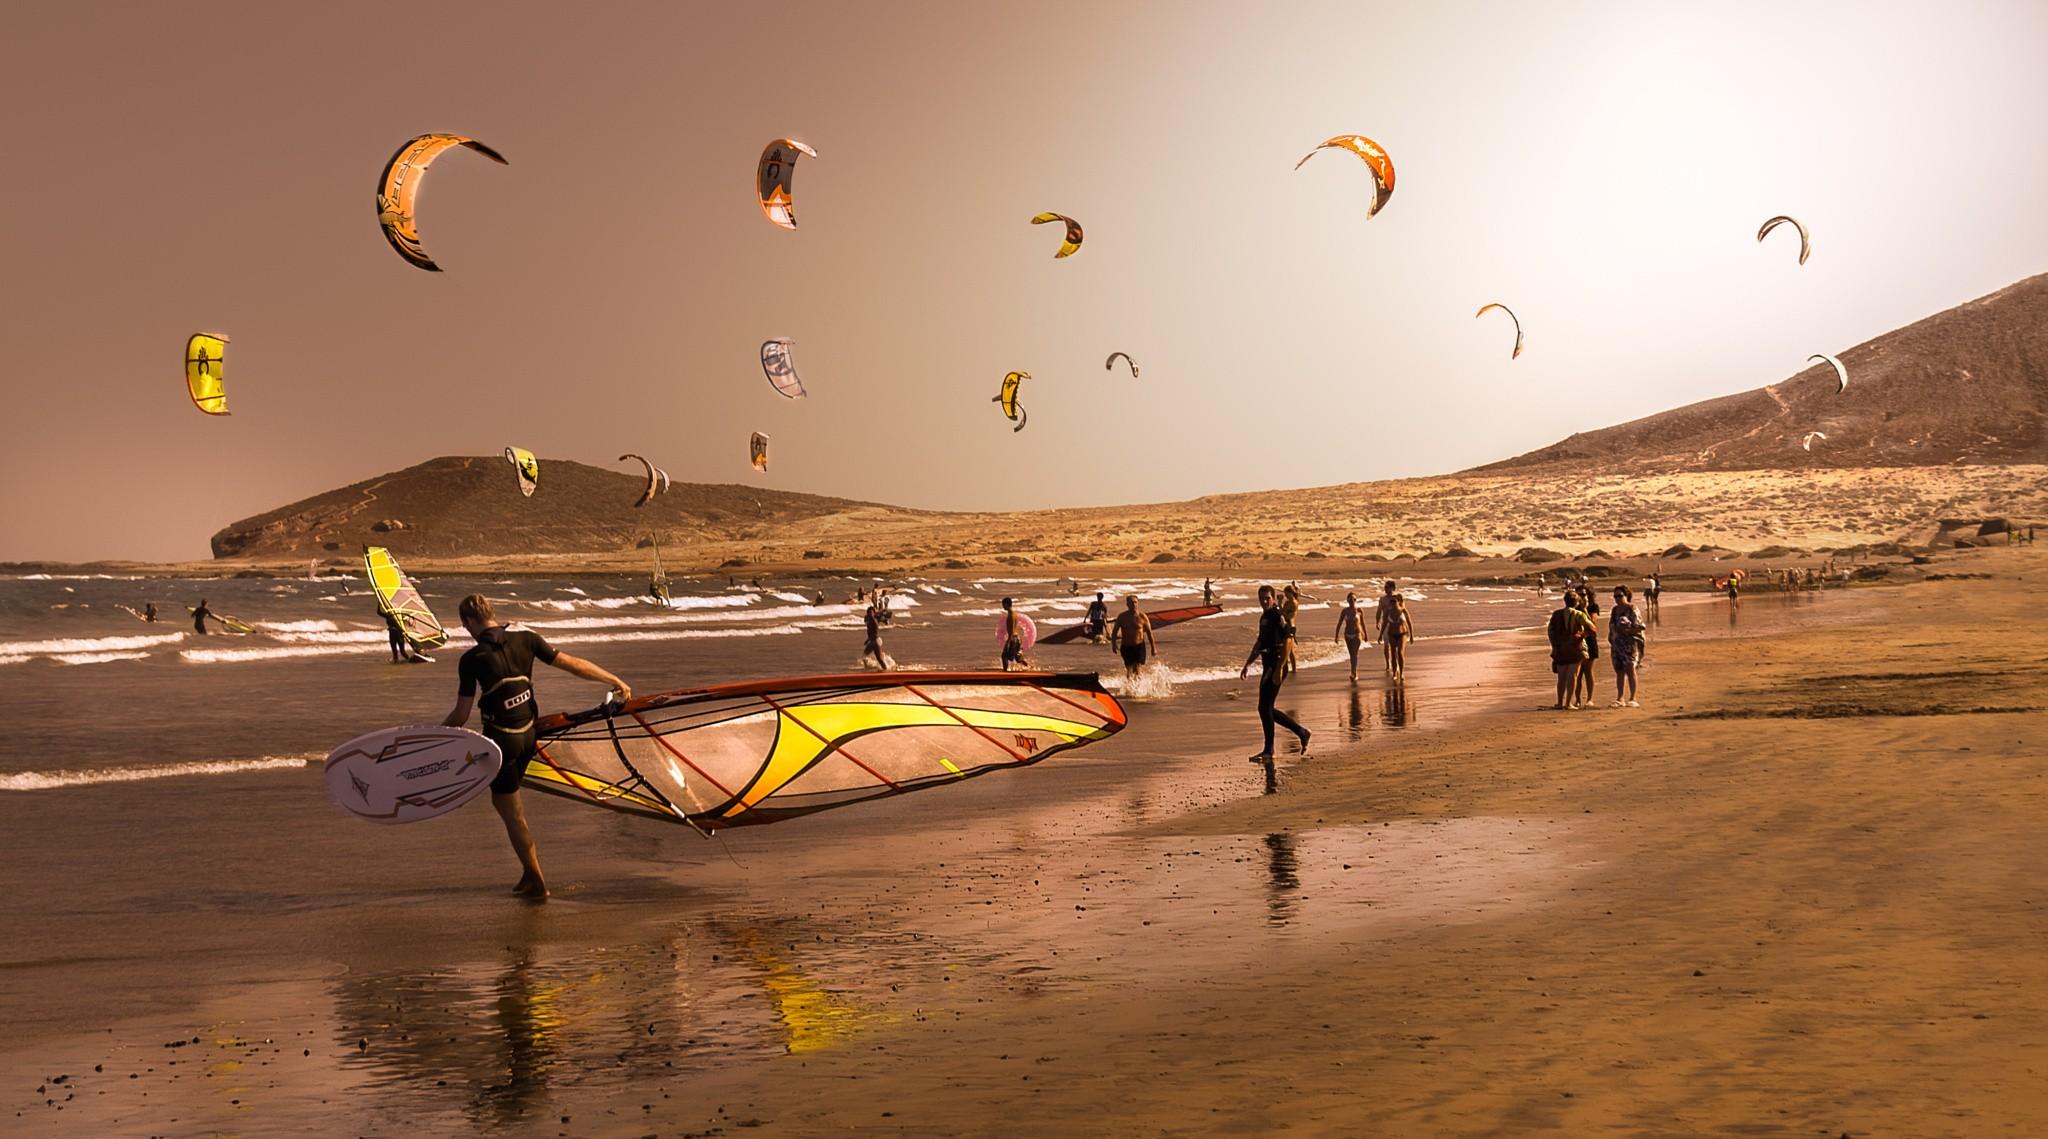 photography kite surfing wallpaper and background